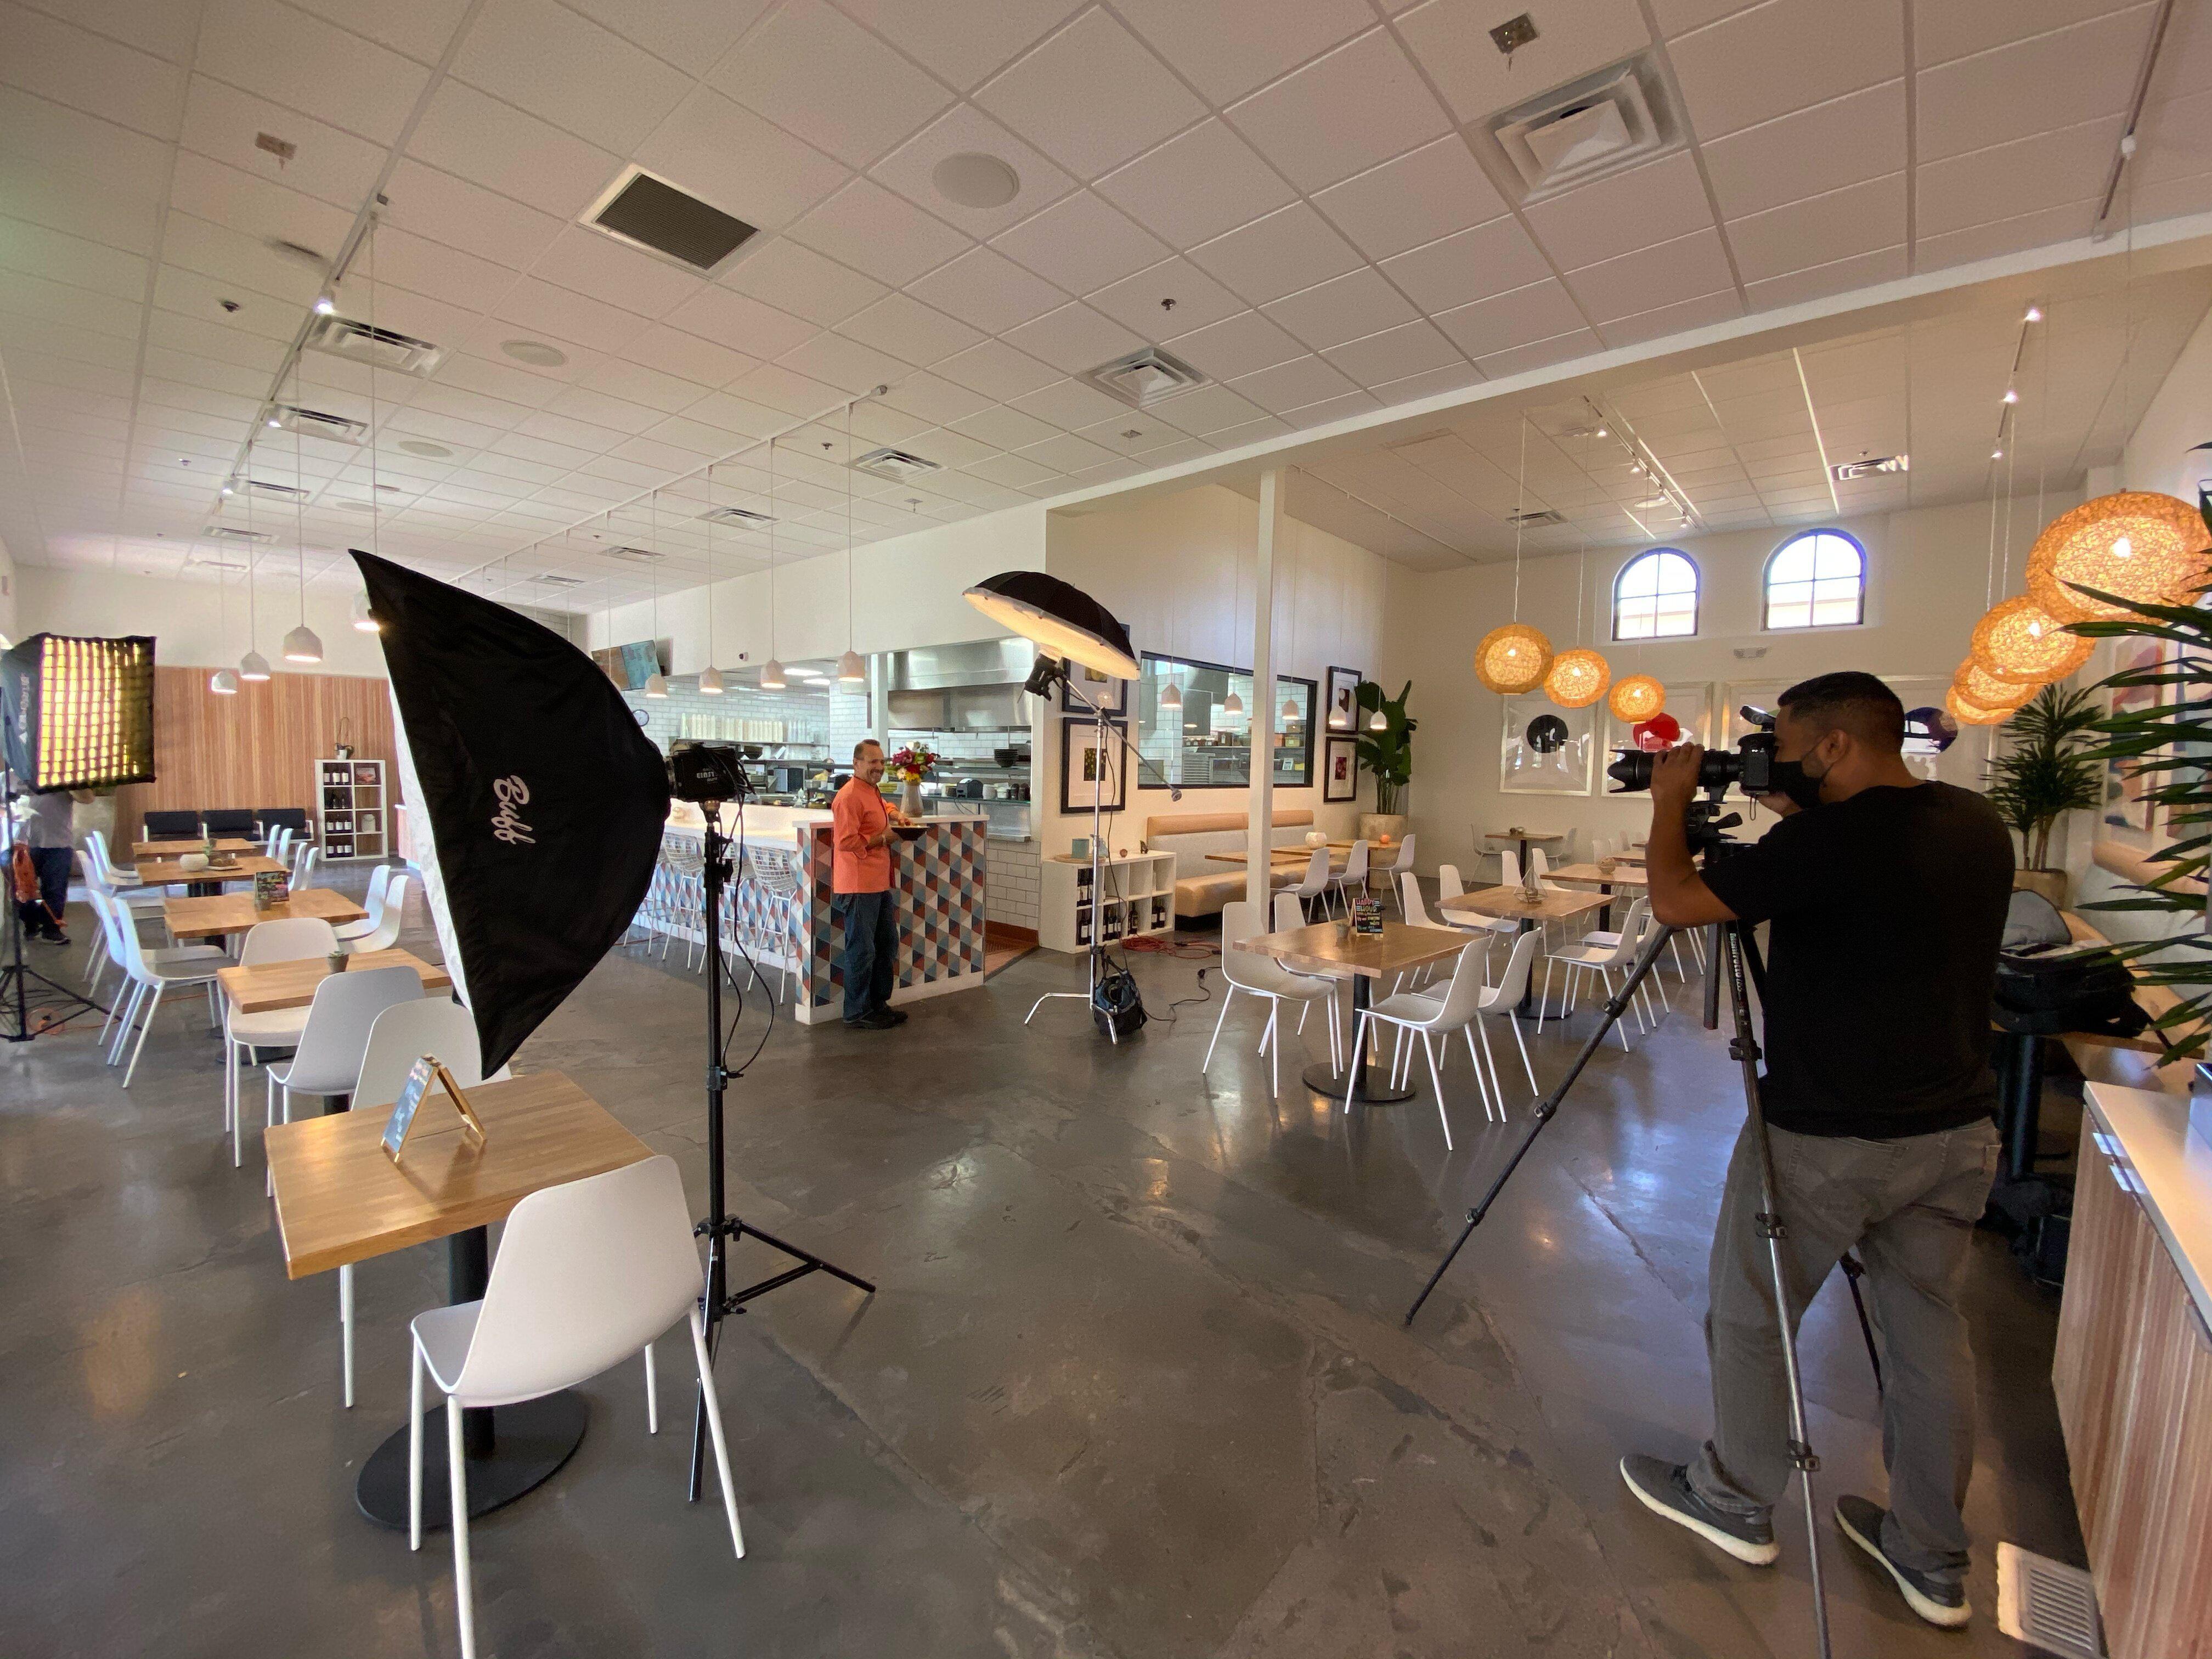 Are you looking for a way to showcase your business in the best light? We offer commercial photography services that capture unique and dynamic images of your business, products, and services.